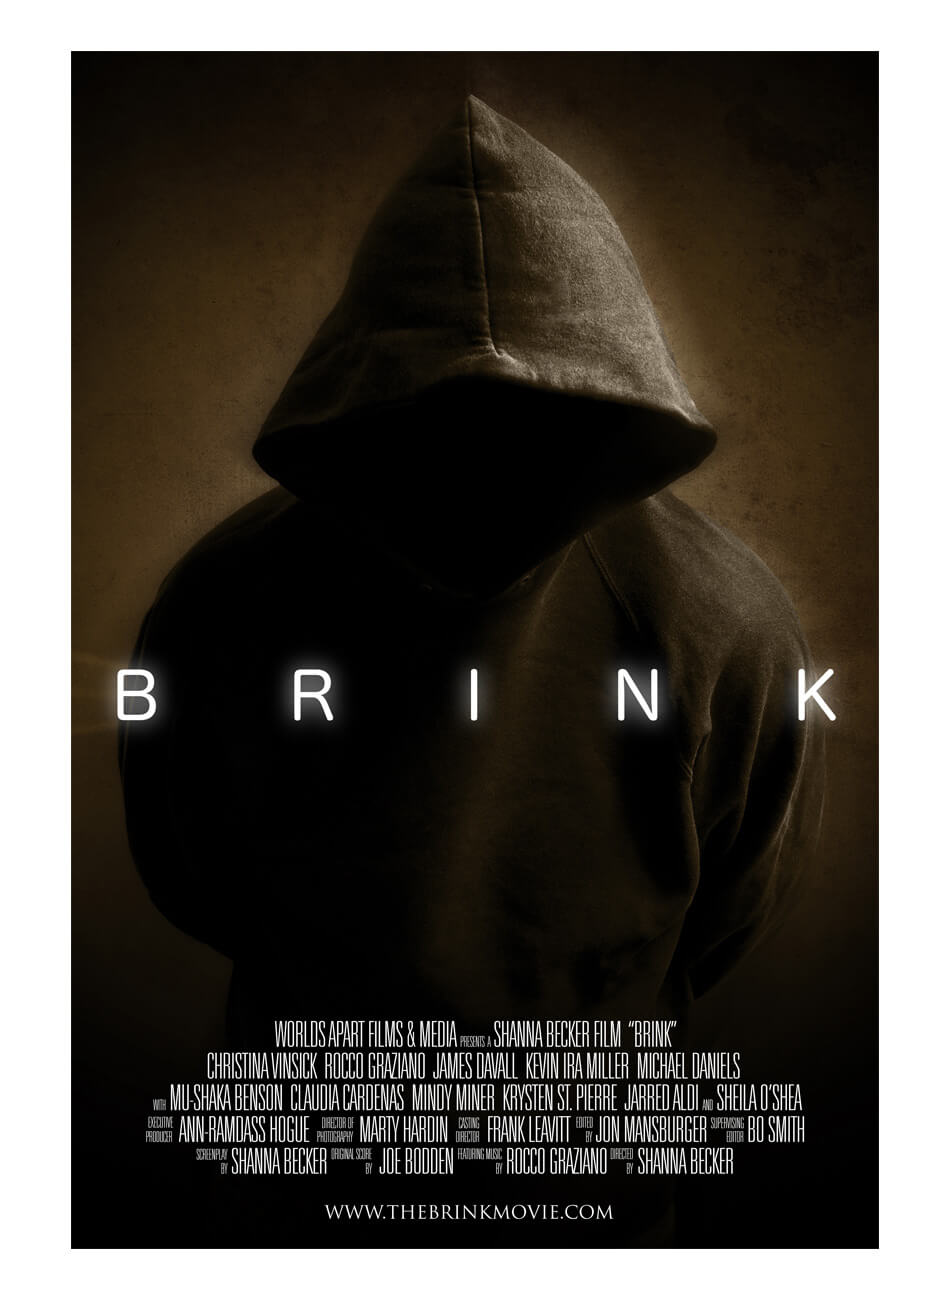 960x1300_Feature_BRINK_poster